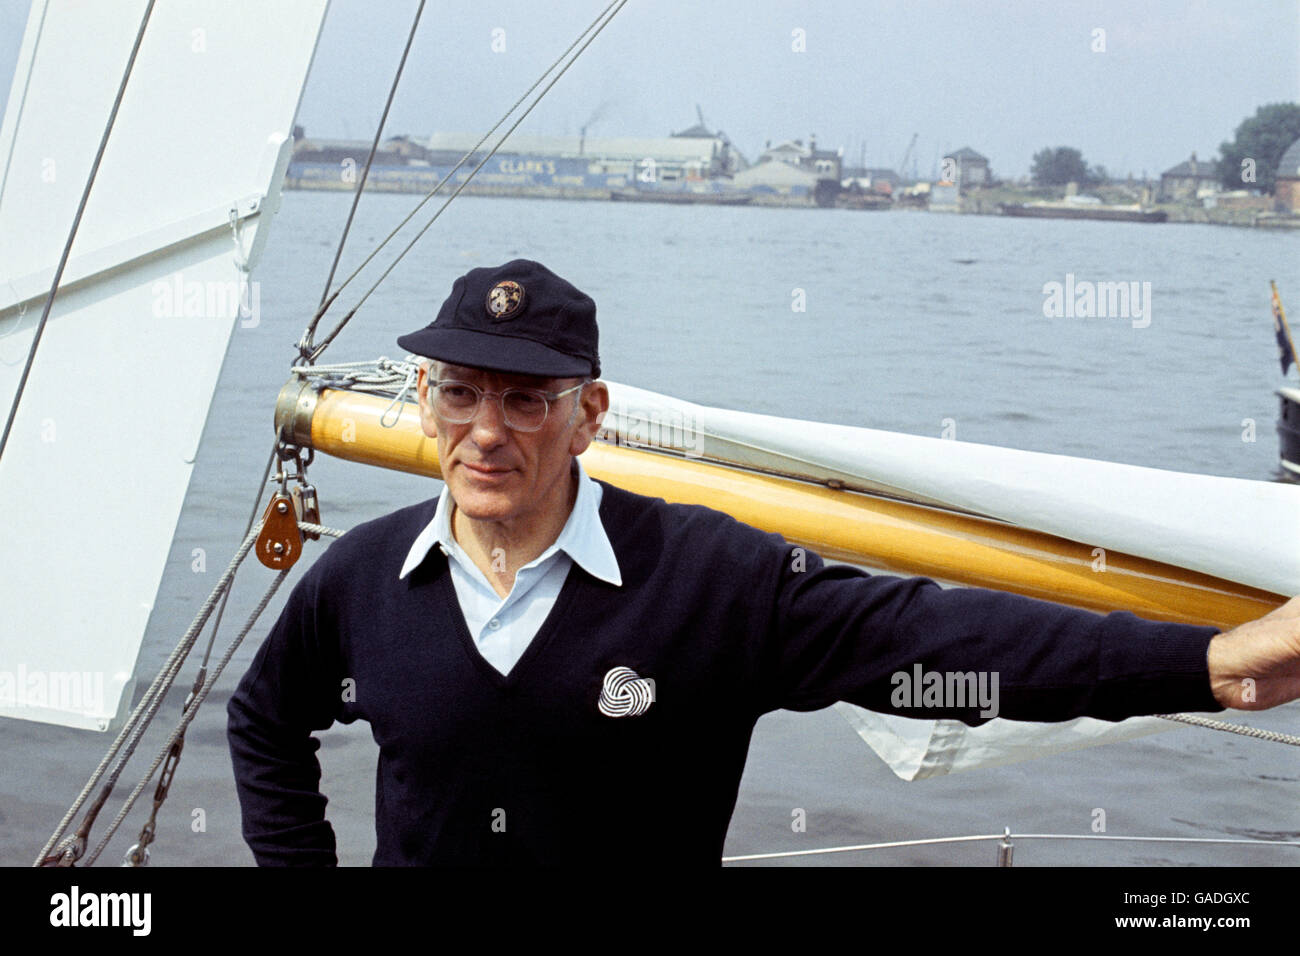 Francis Chichester aboard Gipsy Moth IV, the ship he commissioned specifically to sail single-handed around the globe, at Greenwich prior to his voyage. Stock Photo